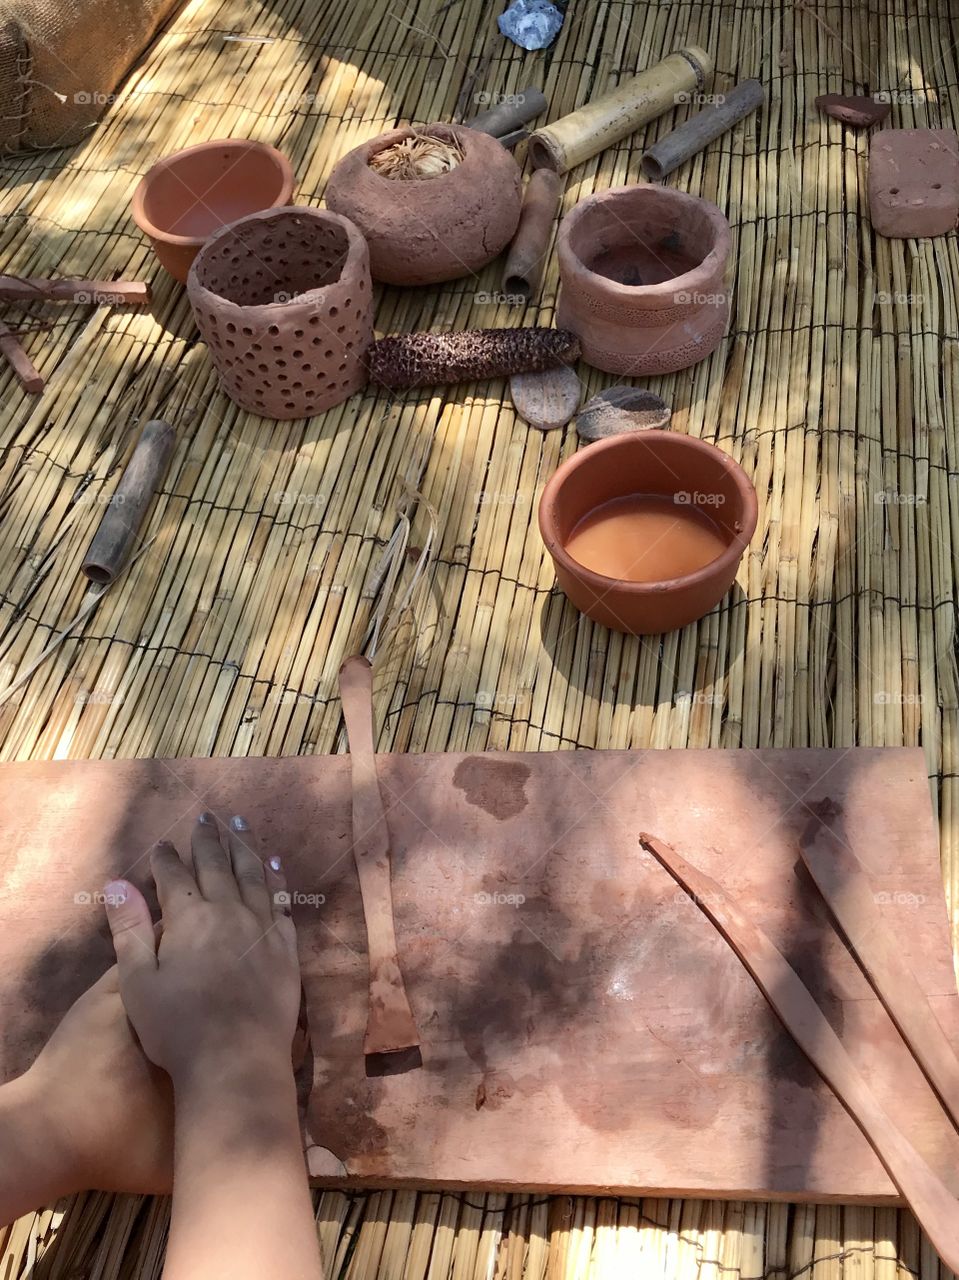 Playing with clay outdoors and making pottery 